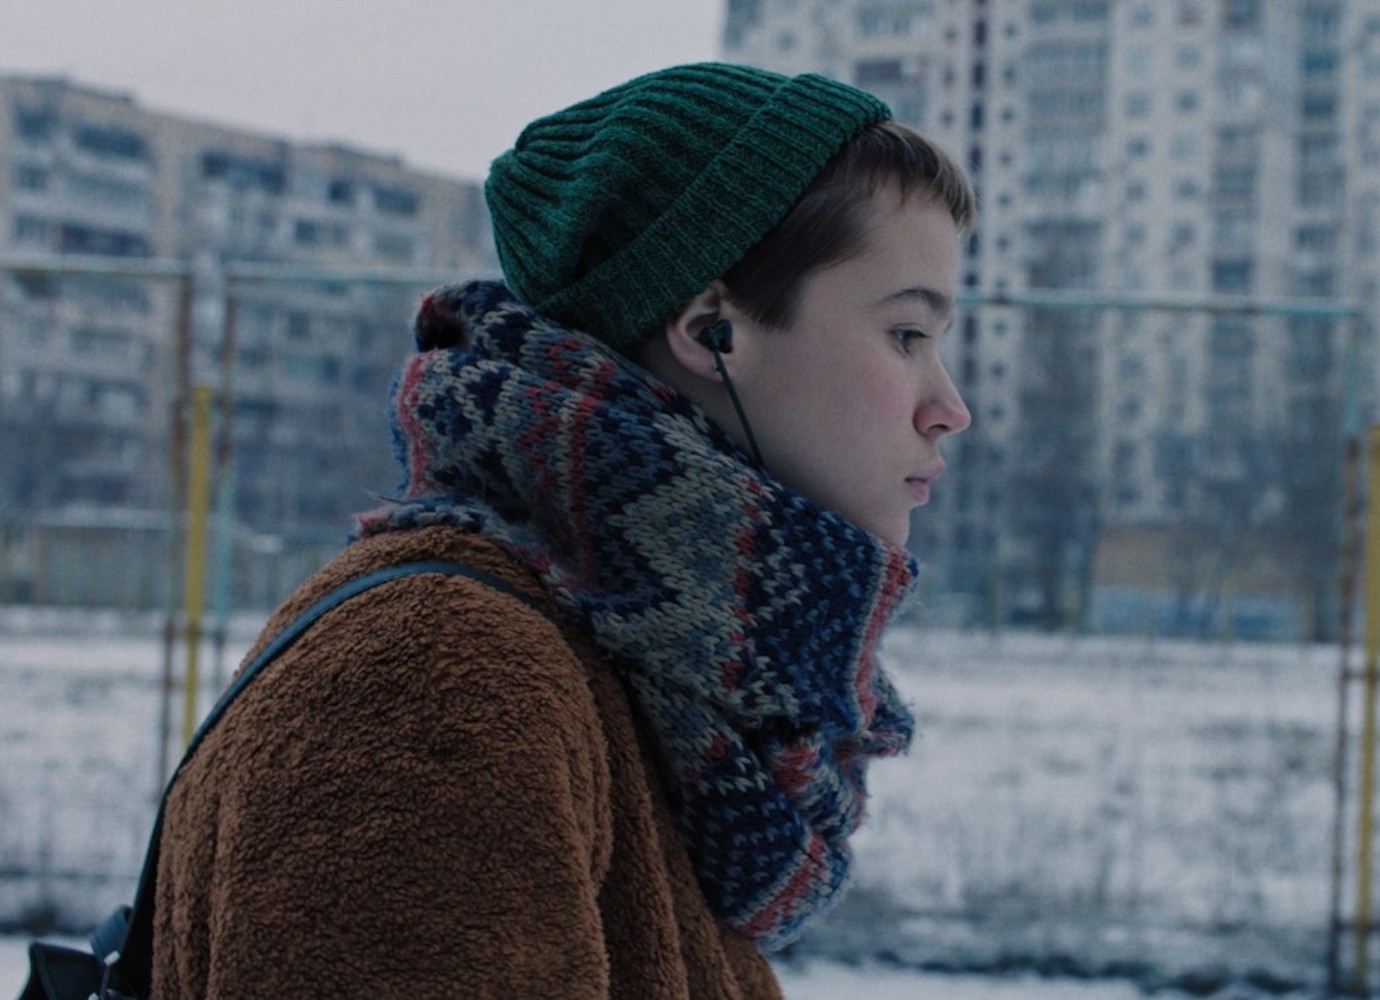 Merging reality and fiction, Stop-Zemlia is an honest account of adolescent turbulence in Ukraine 